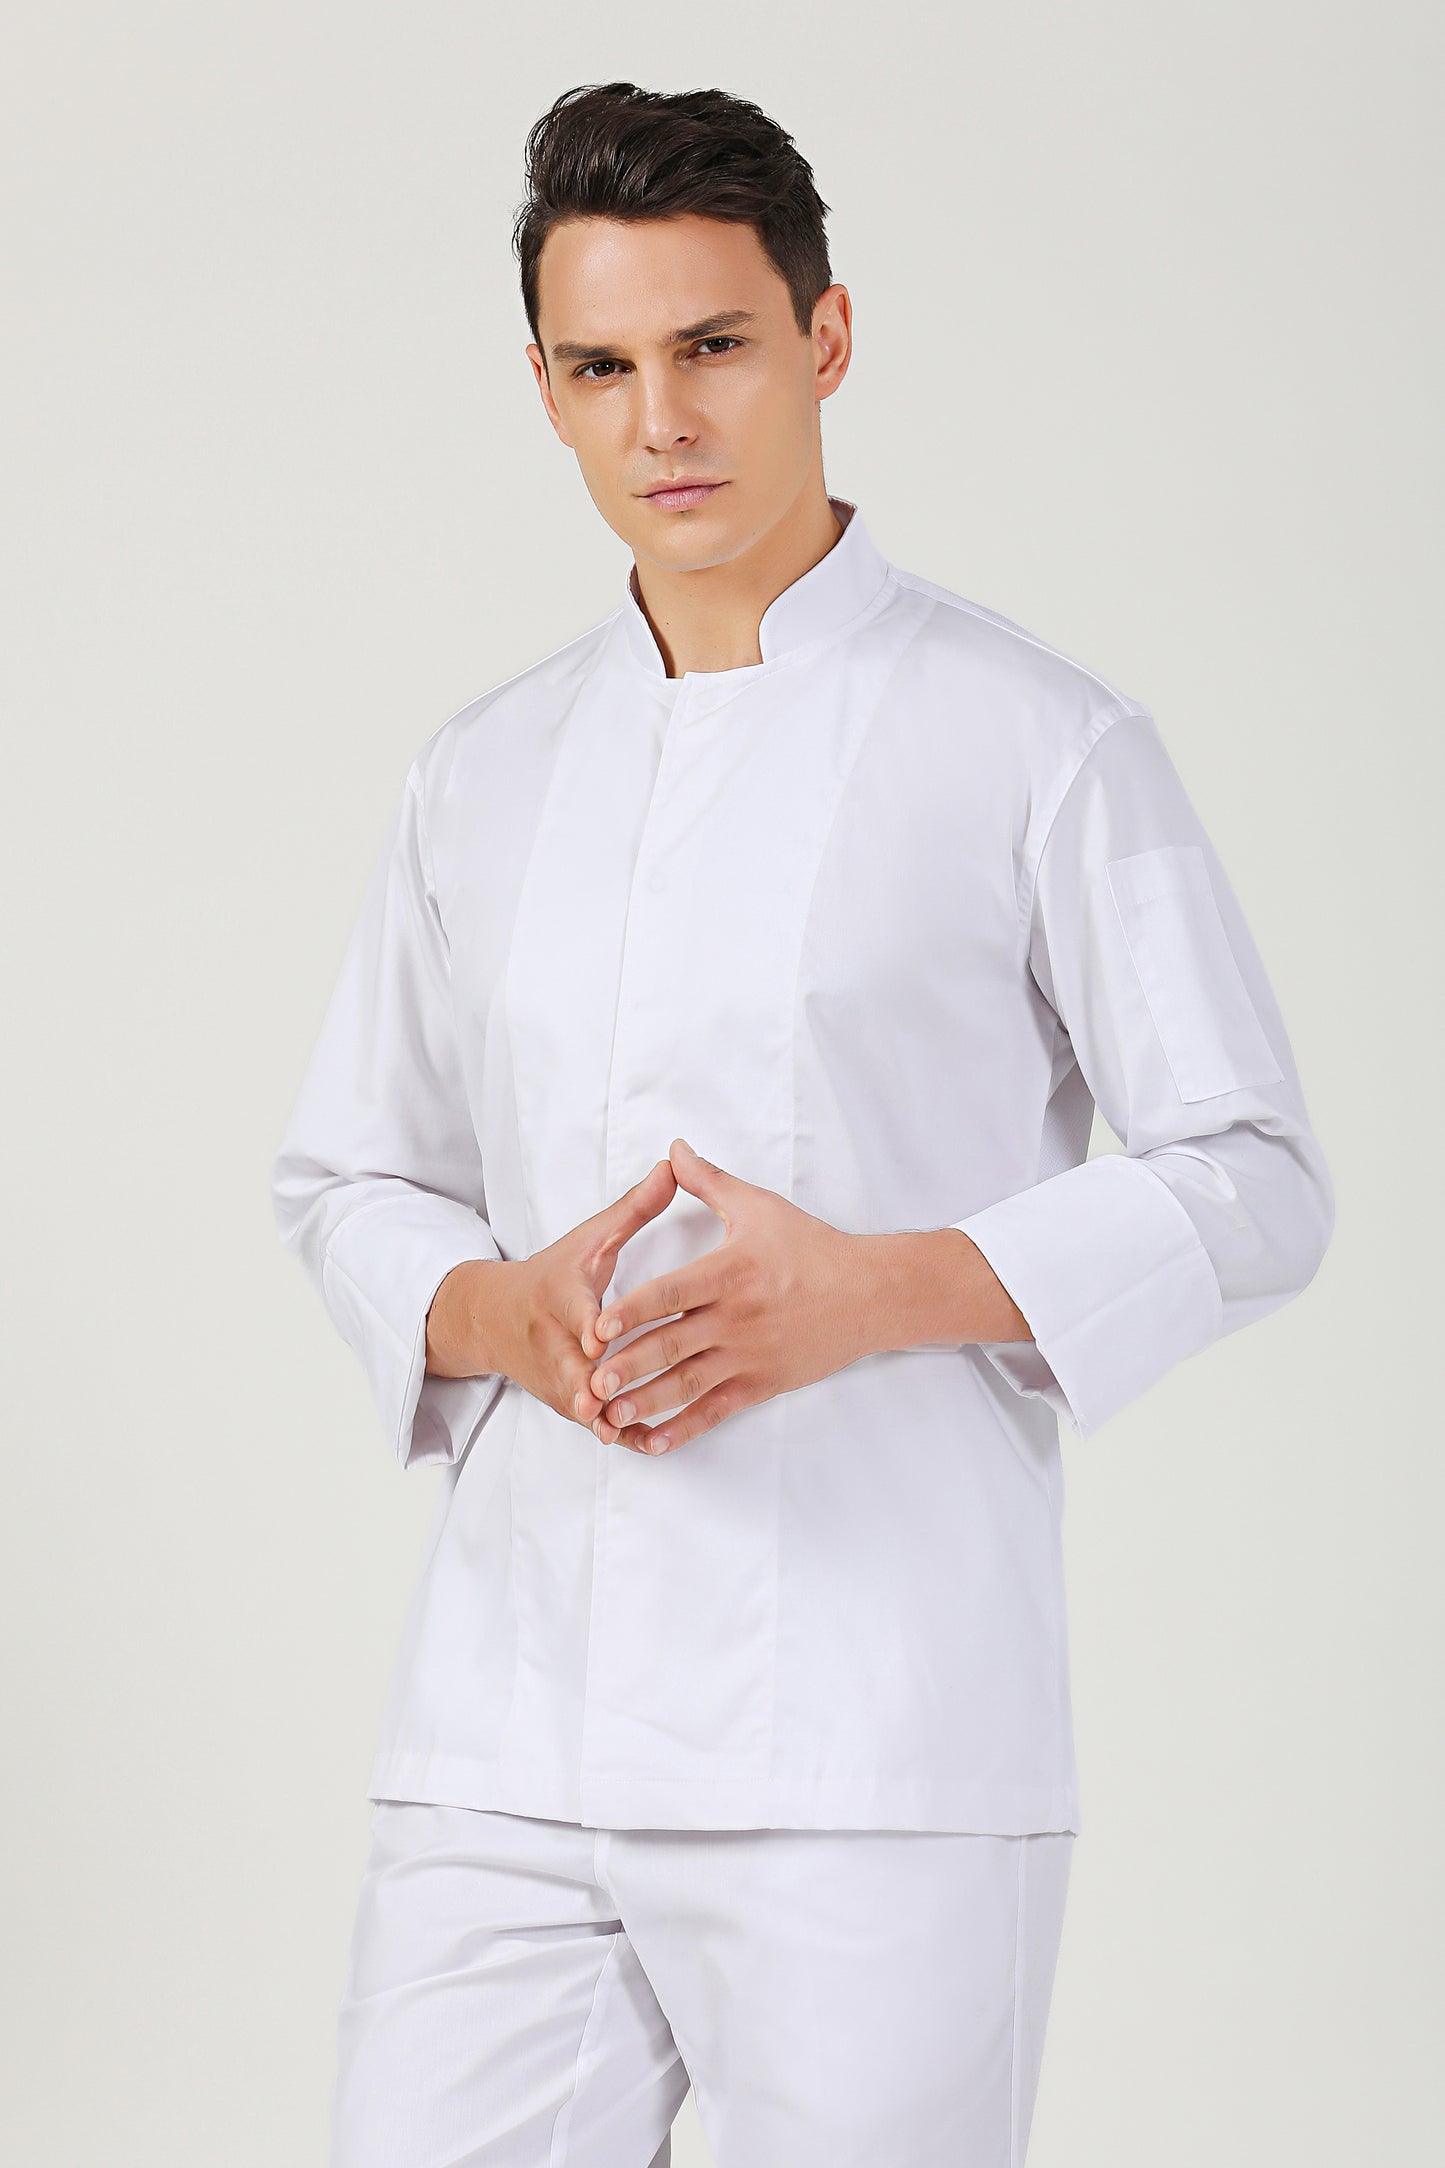 Peppermint White Chef Jacket, Long Sleeve